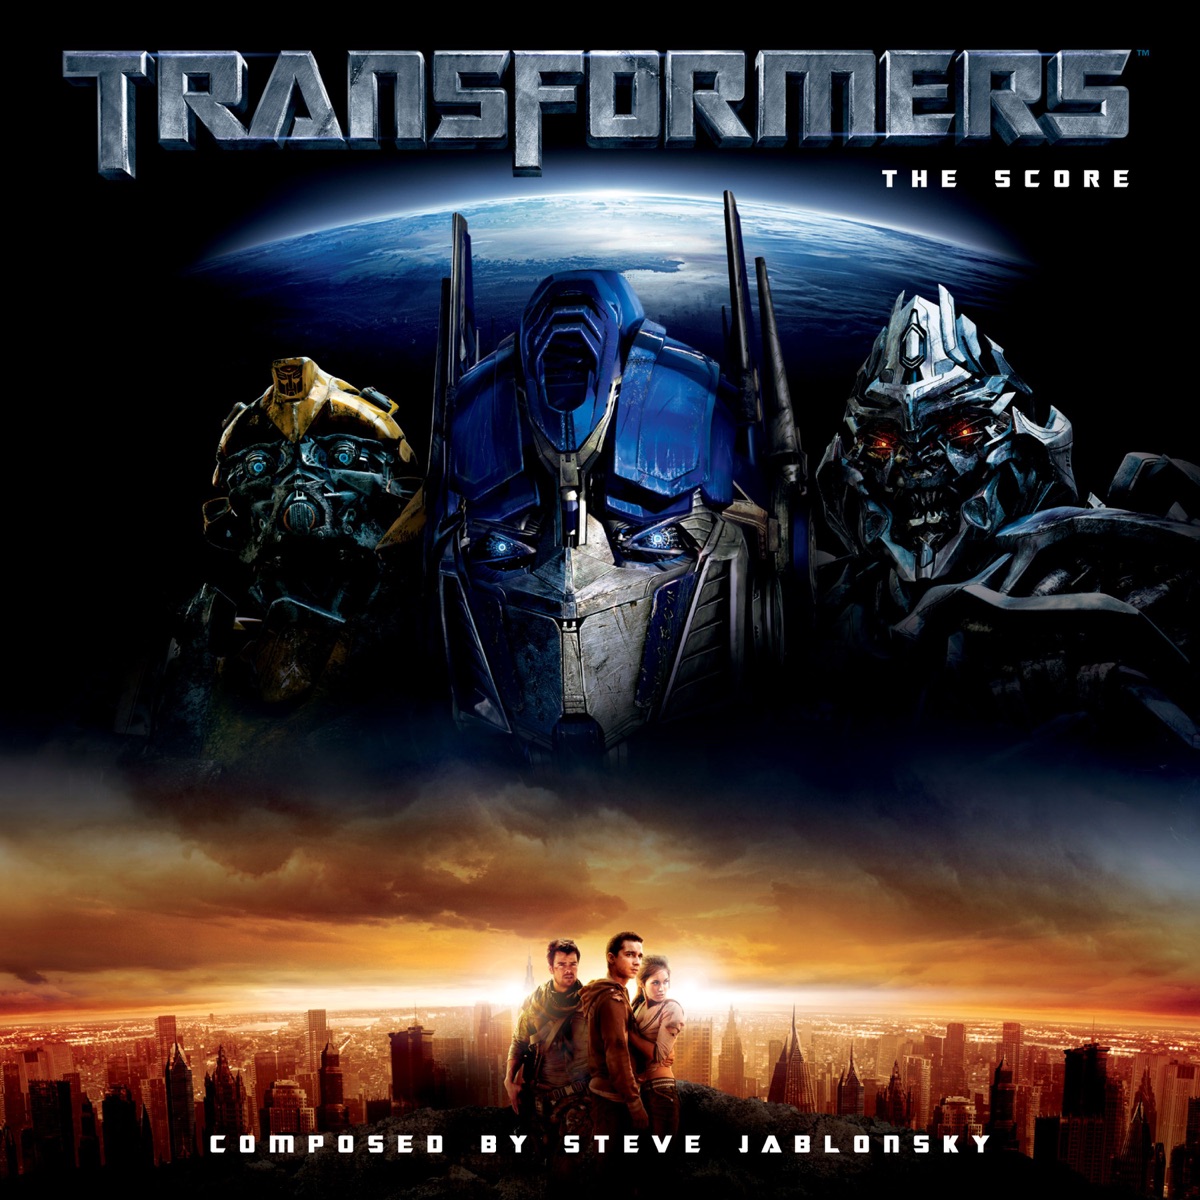 The Transformers: The Movie (Original Motion Picture Soundtrack